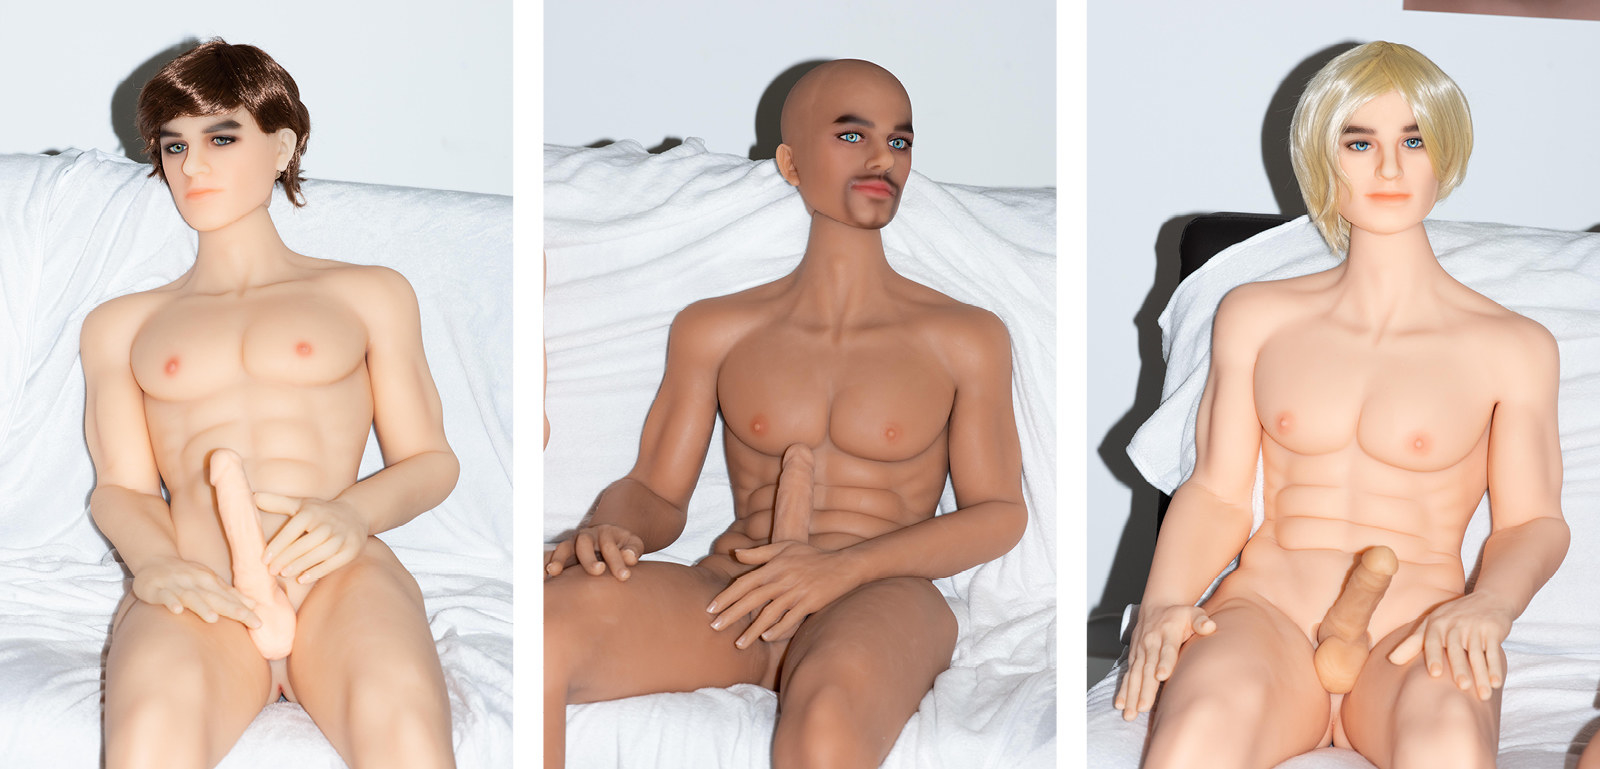 Male Sex Dolls For Women - Male Sex Dolls: They're Not Just For Sex